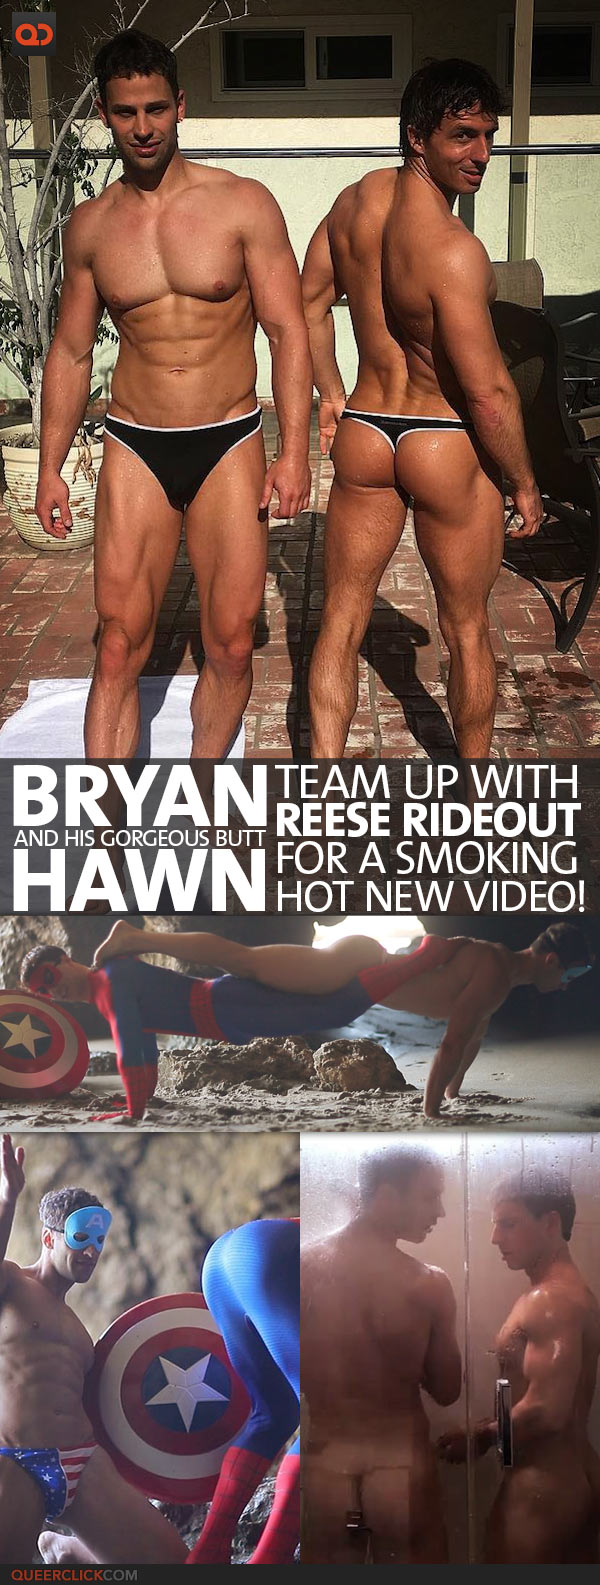 Bryan Hawn, And His Gorgeous Butt, Team Up With Reese Rideout For A Smoking Hot New Video!